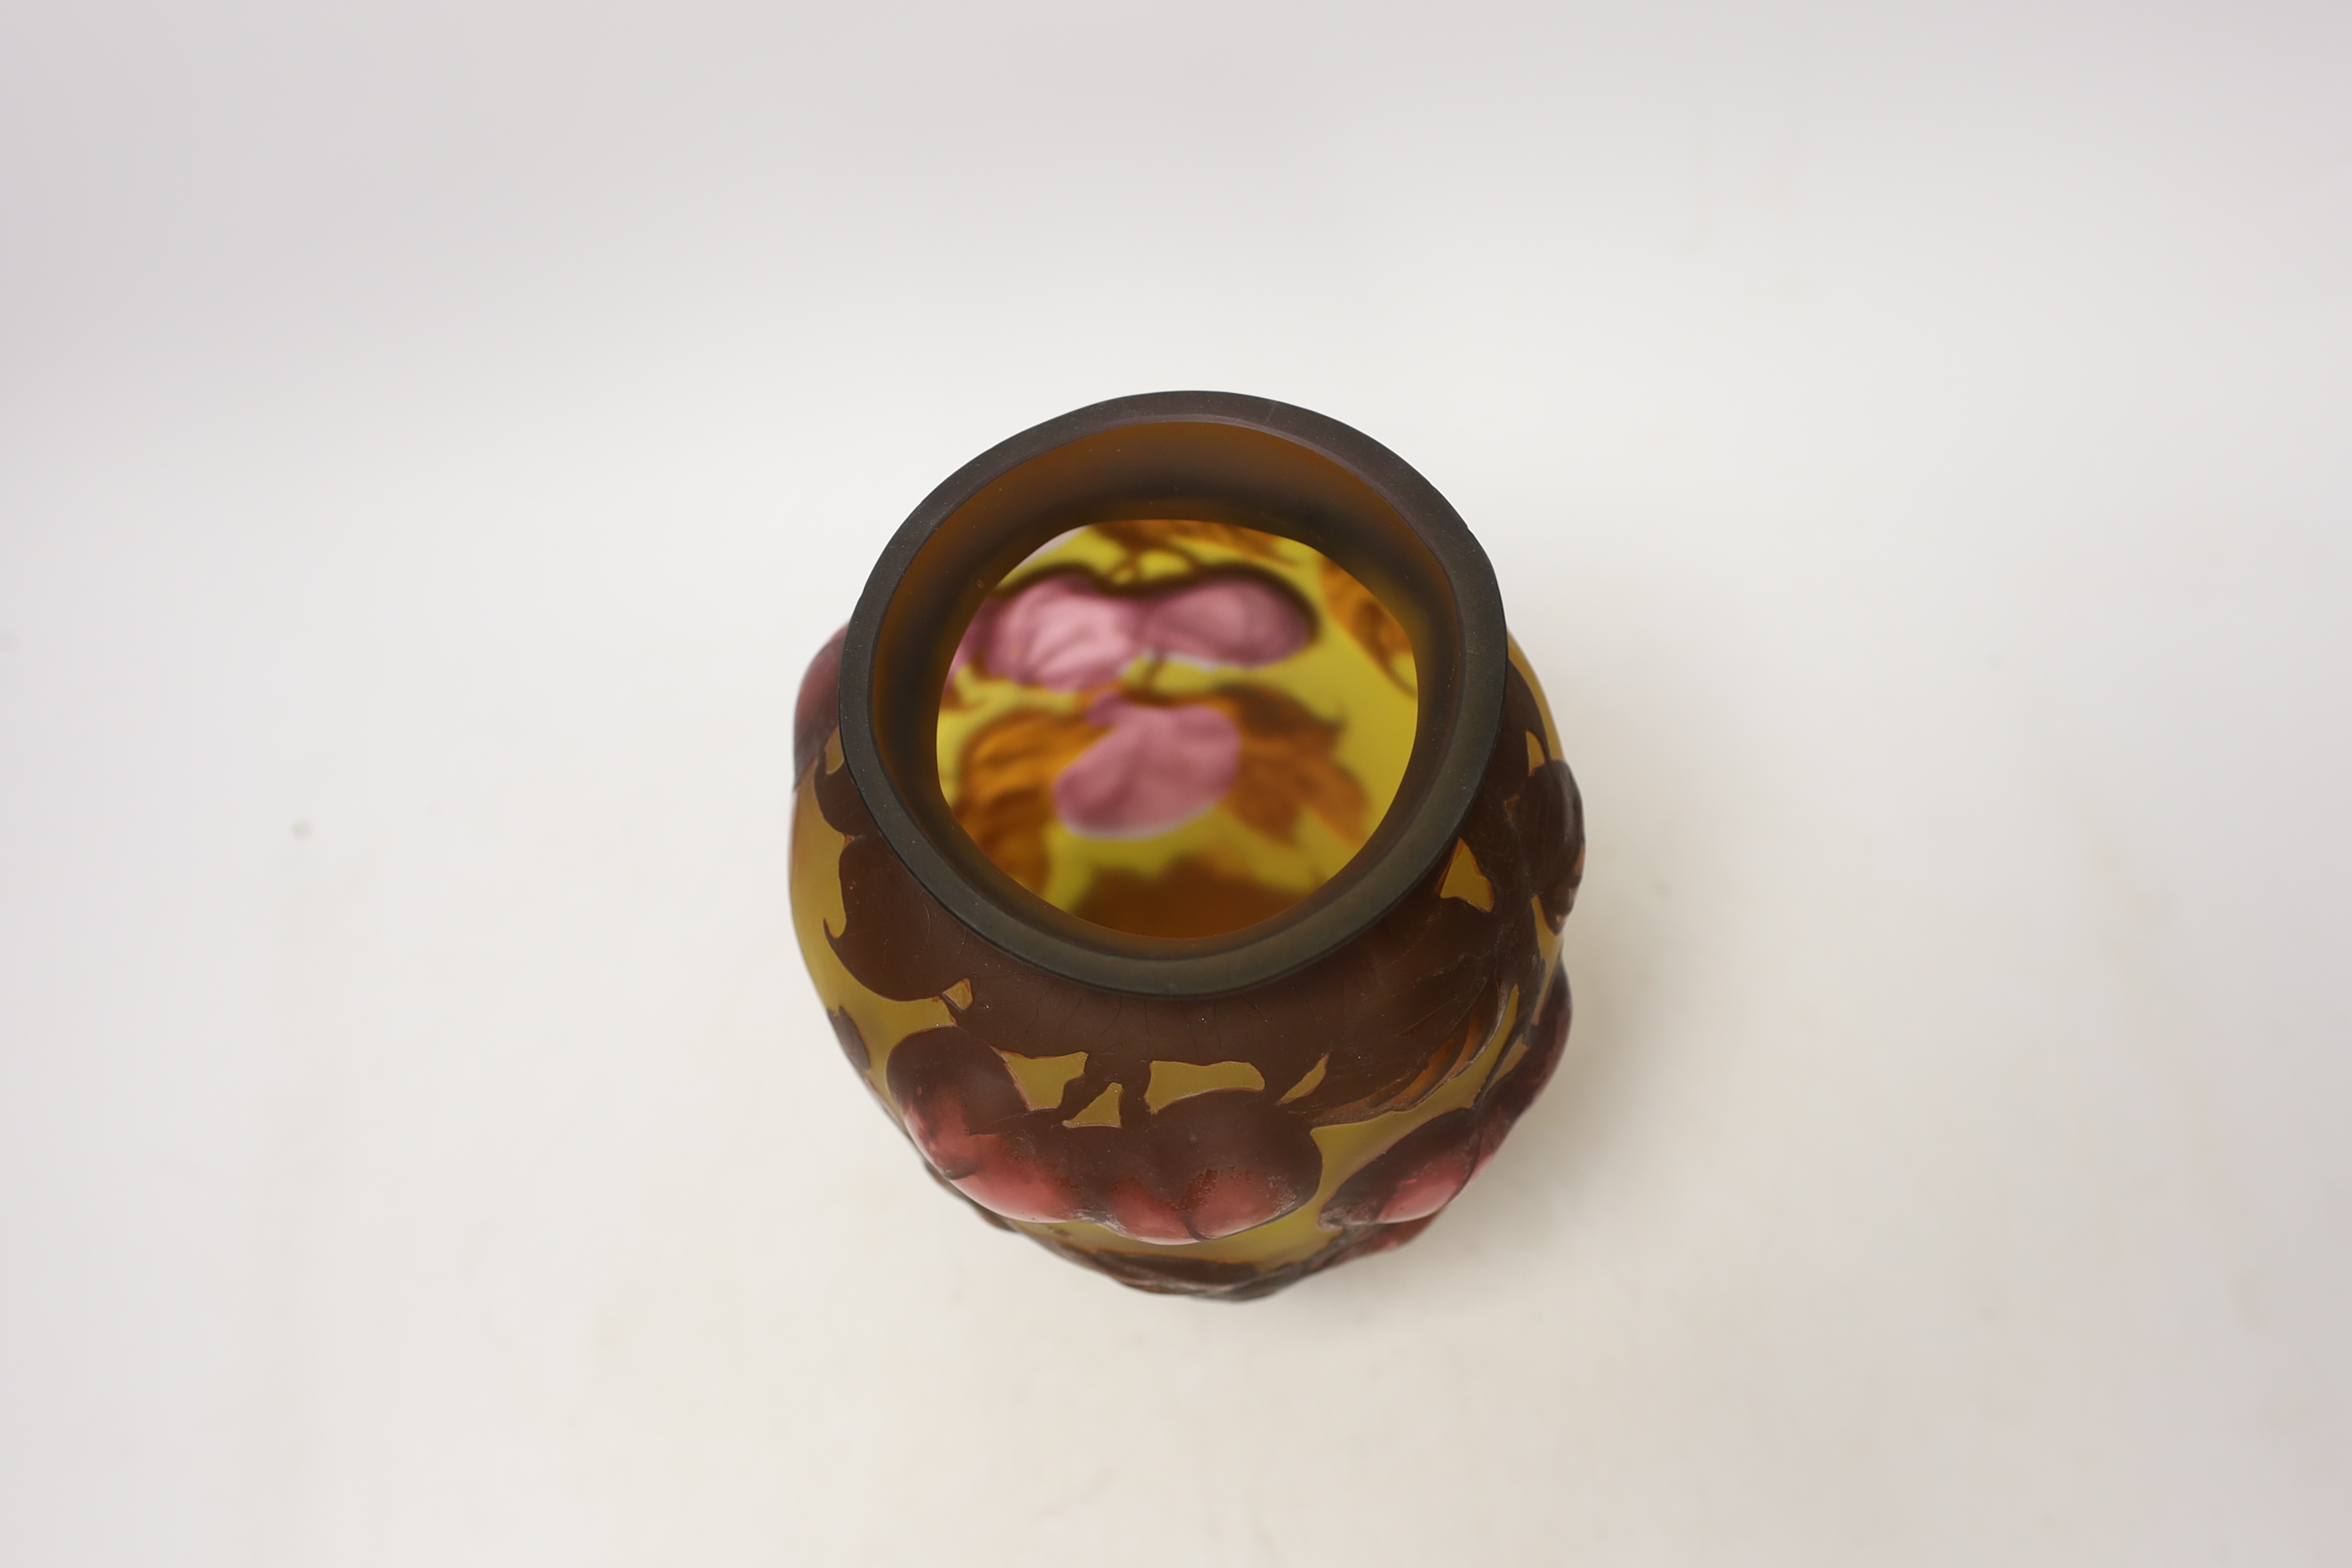 A Galle style cameo glass vase, 21cm